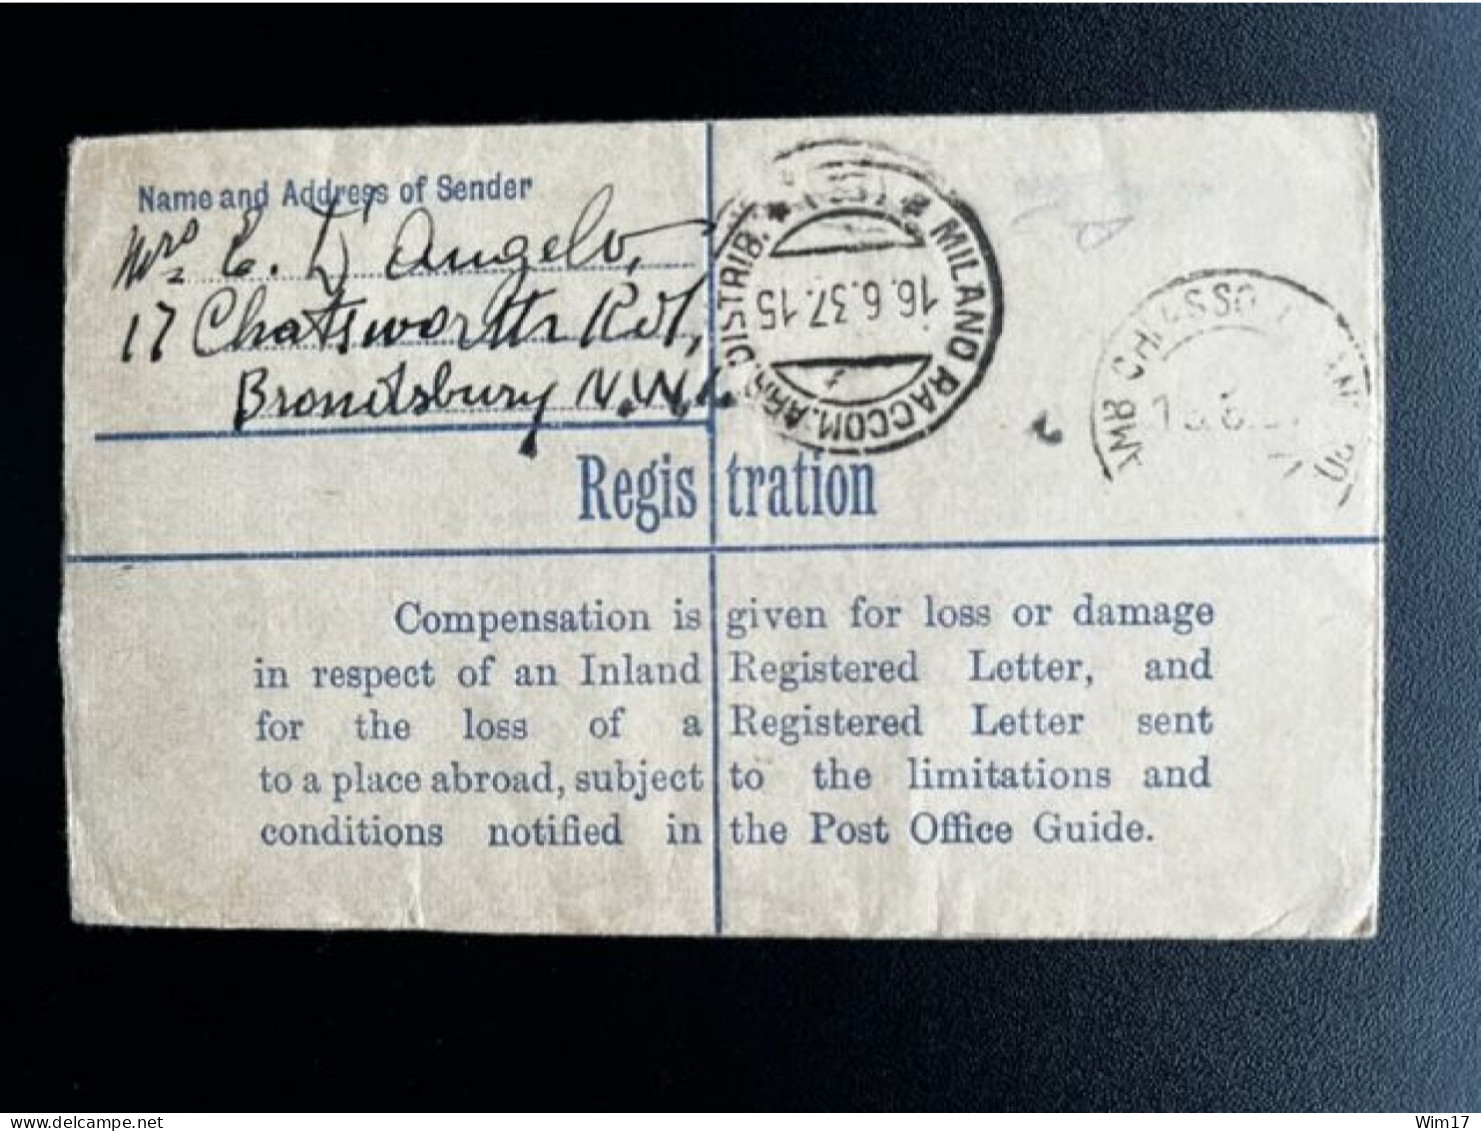 GREAT BRITAIN 1937 REGISTERED LETTER LONDON TO MILAN 14-06-1937 GROOT BRITTANNIE - Covers & Documents